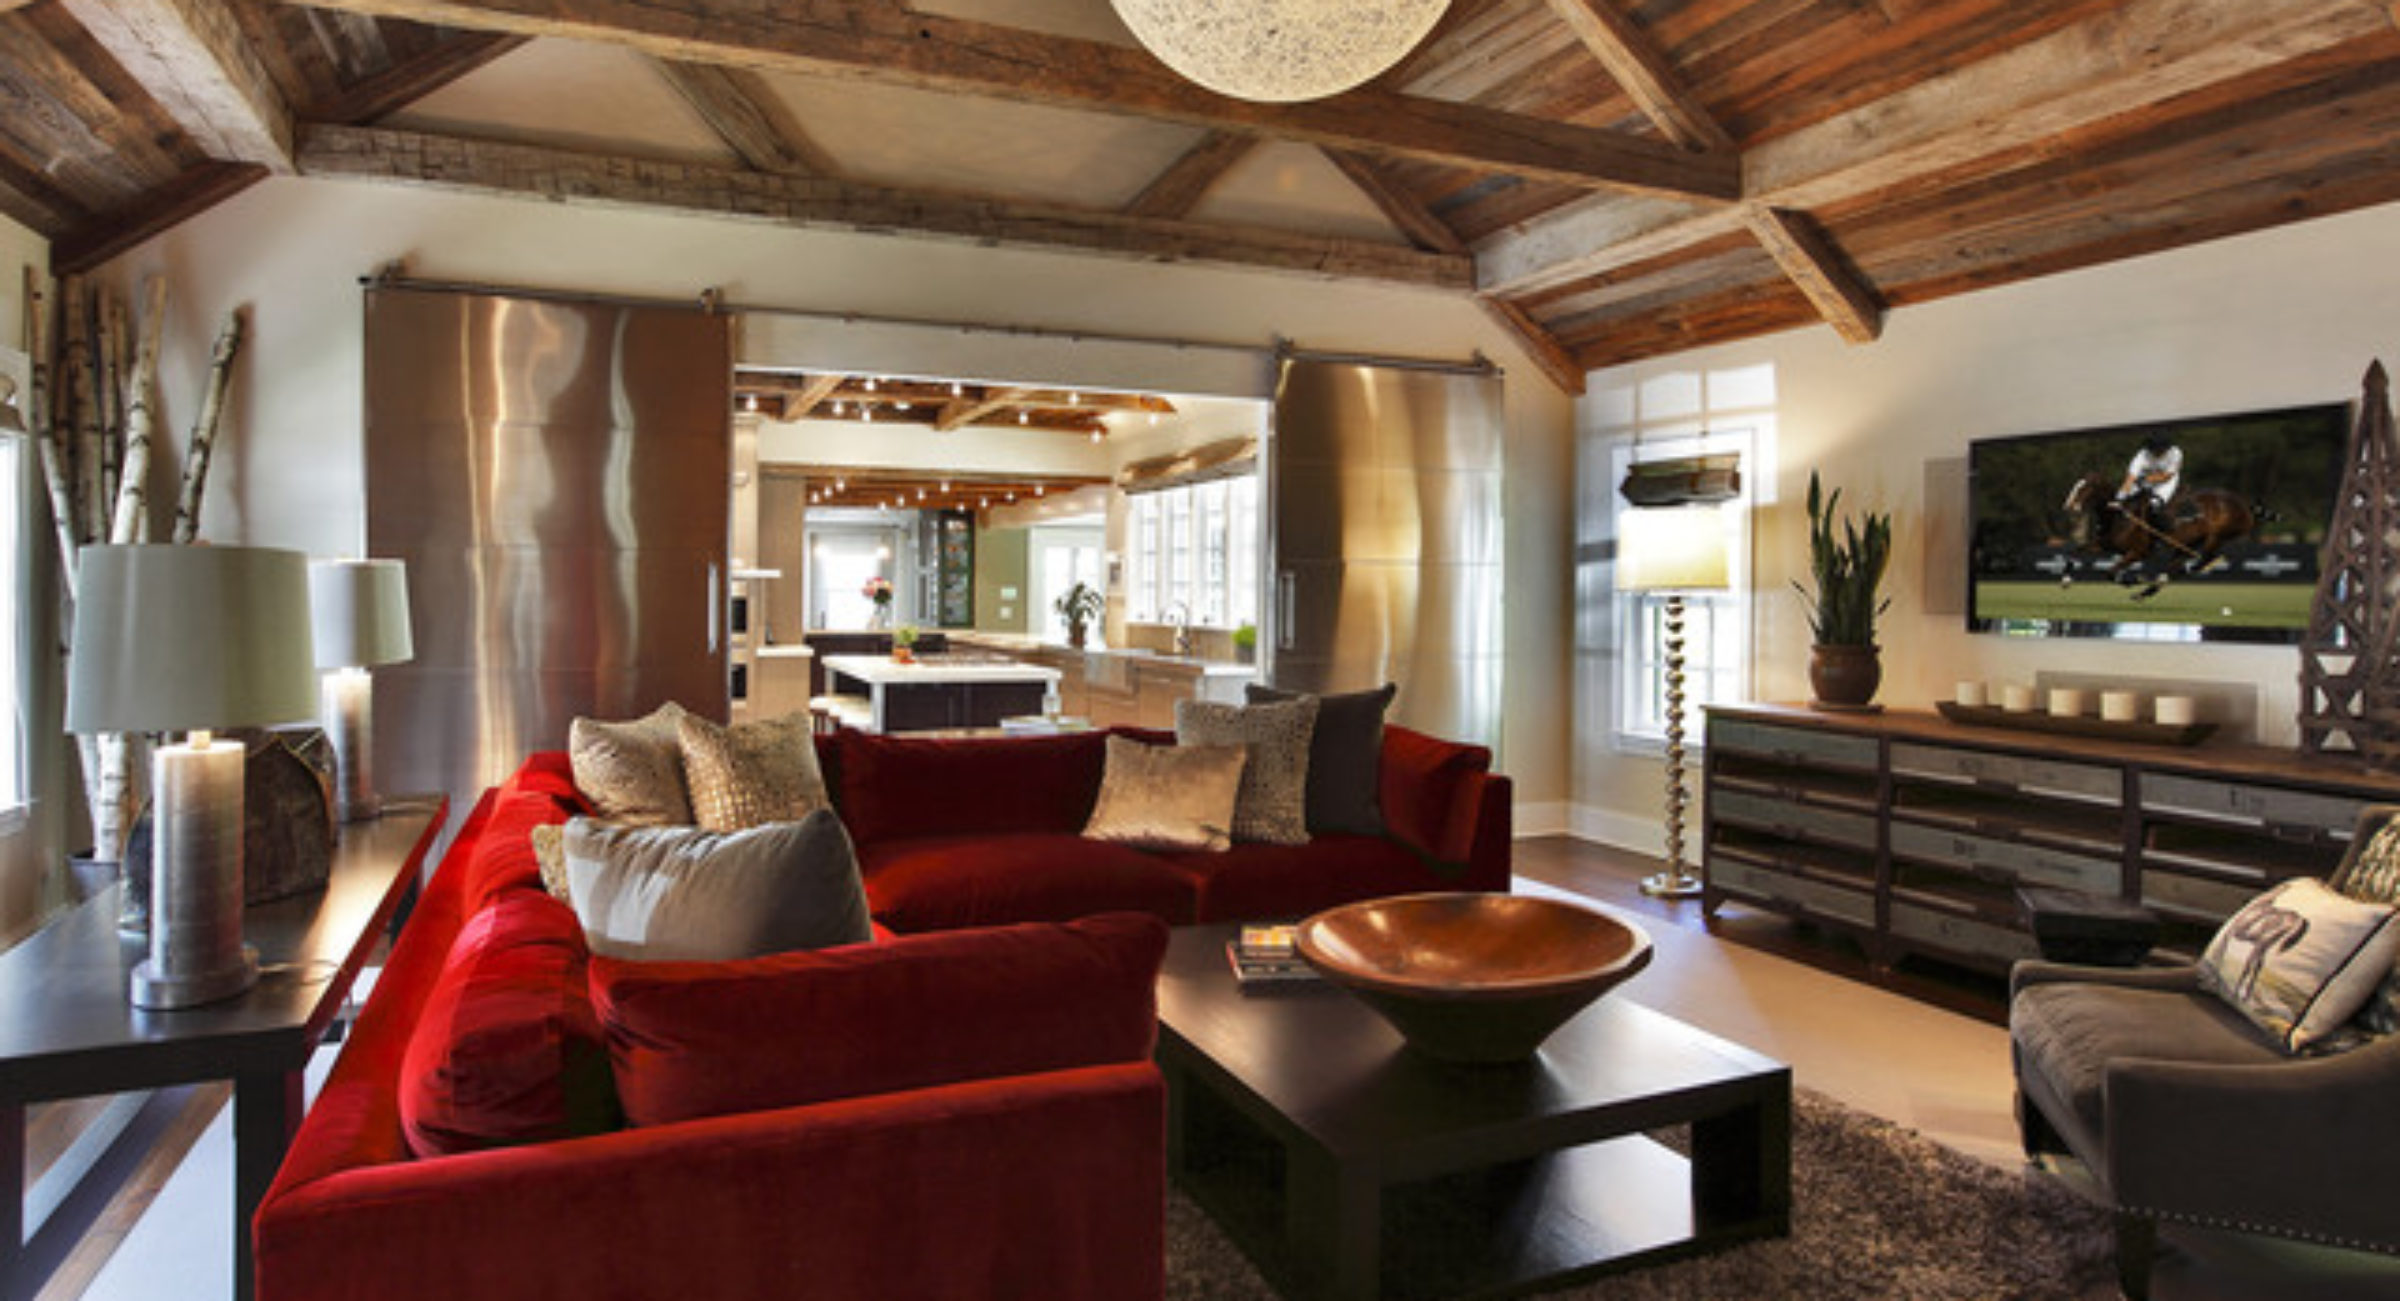 cropped-Rustic-House-Lounge-Area-Ith-Incredible-Beams-On-Ceiling-And-sectional-modern-sofa-elegant-Red-Sectional-Sofa-To-Strike-The-Beautiful-Neutral-Interior-Concept.jpg